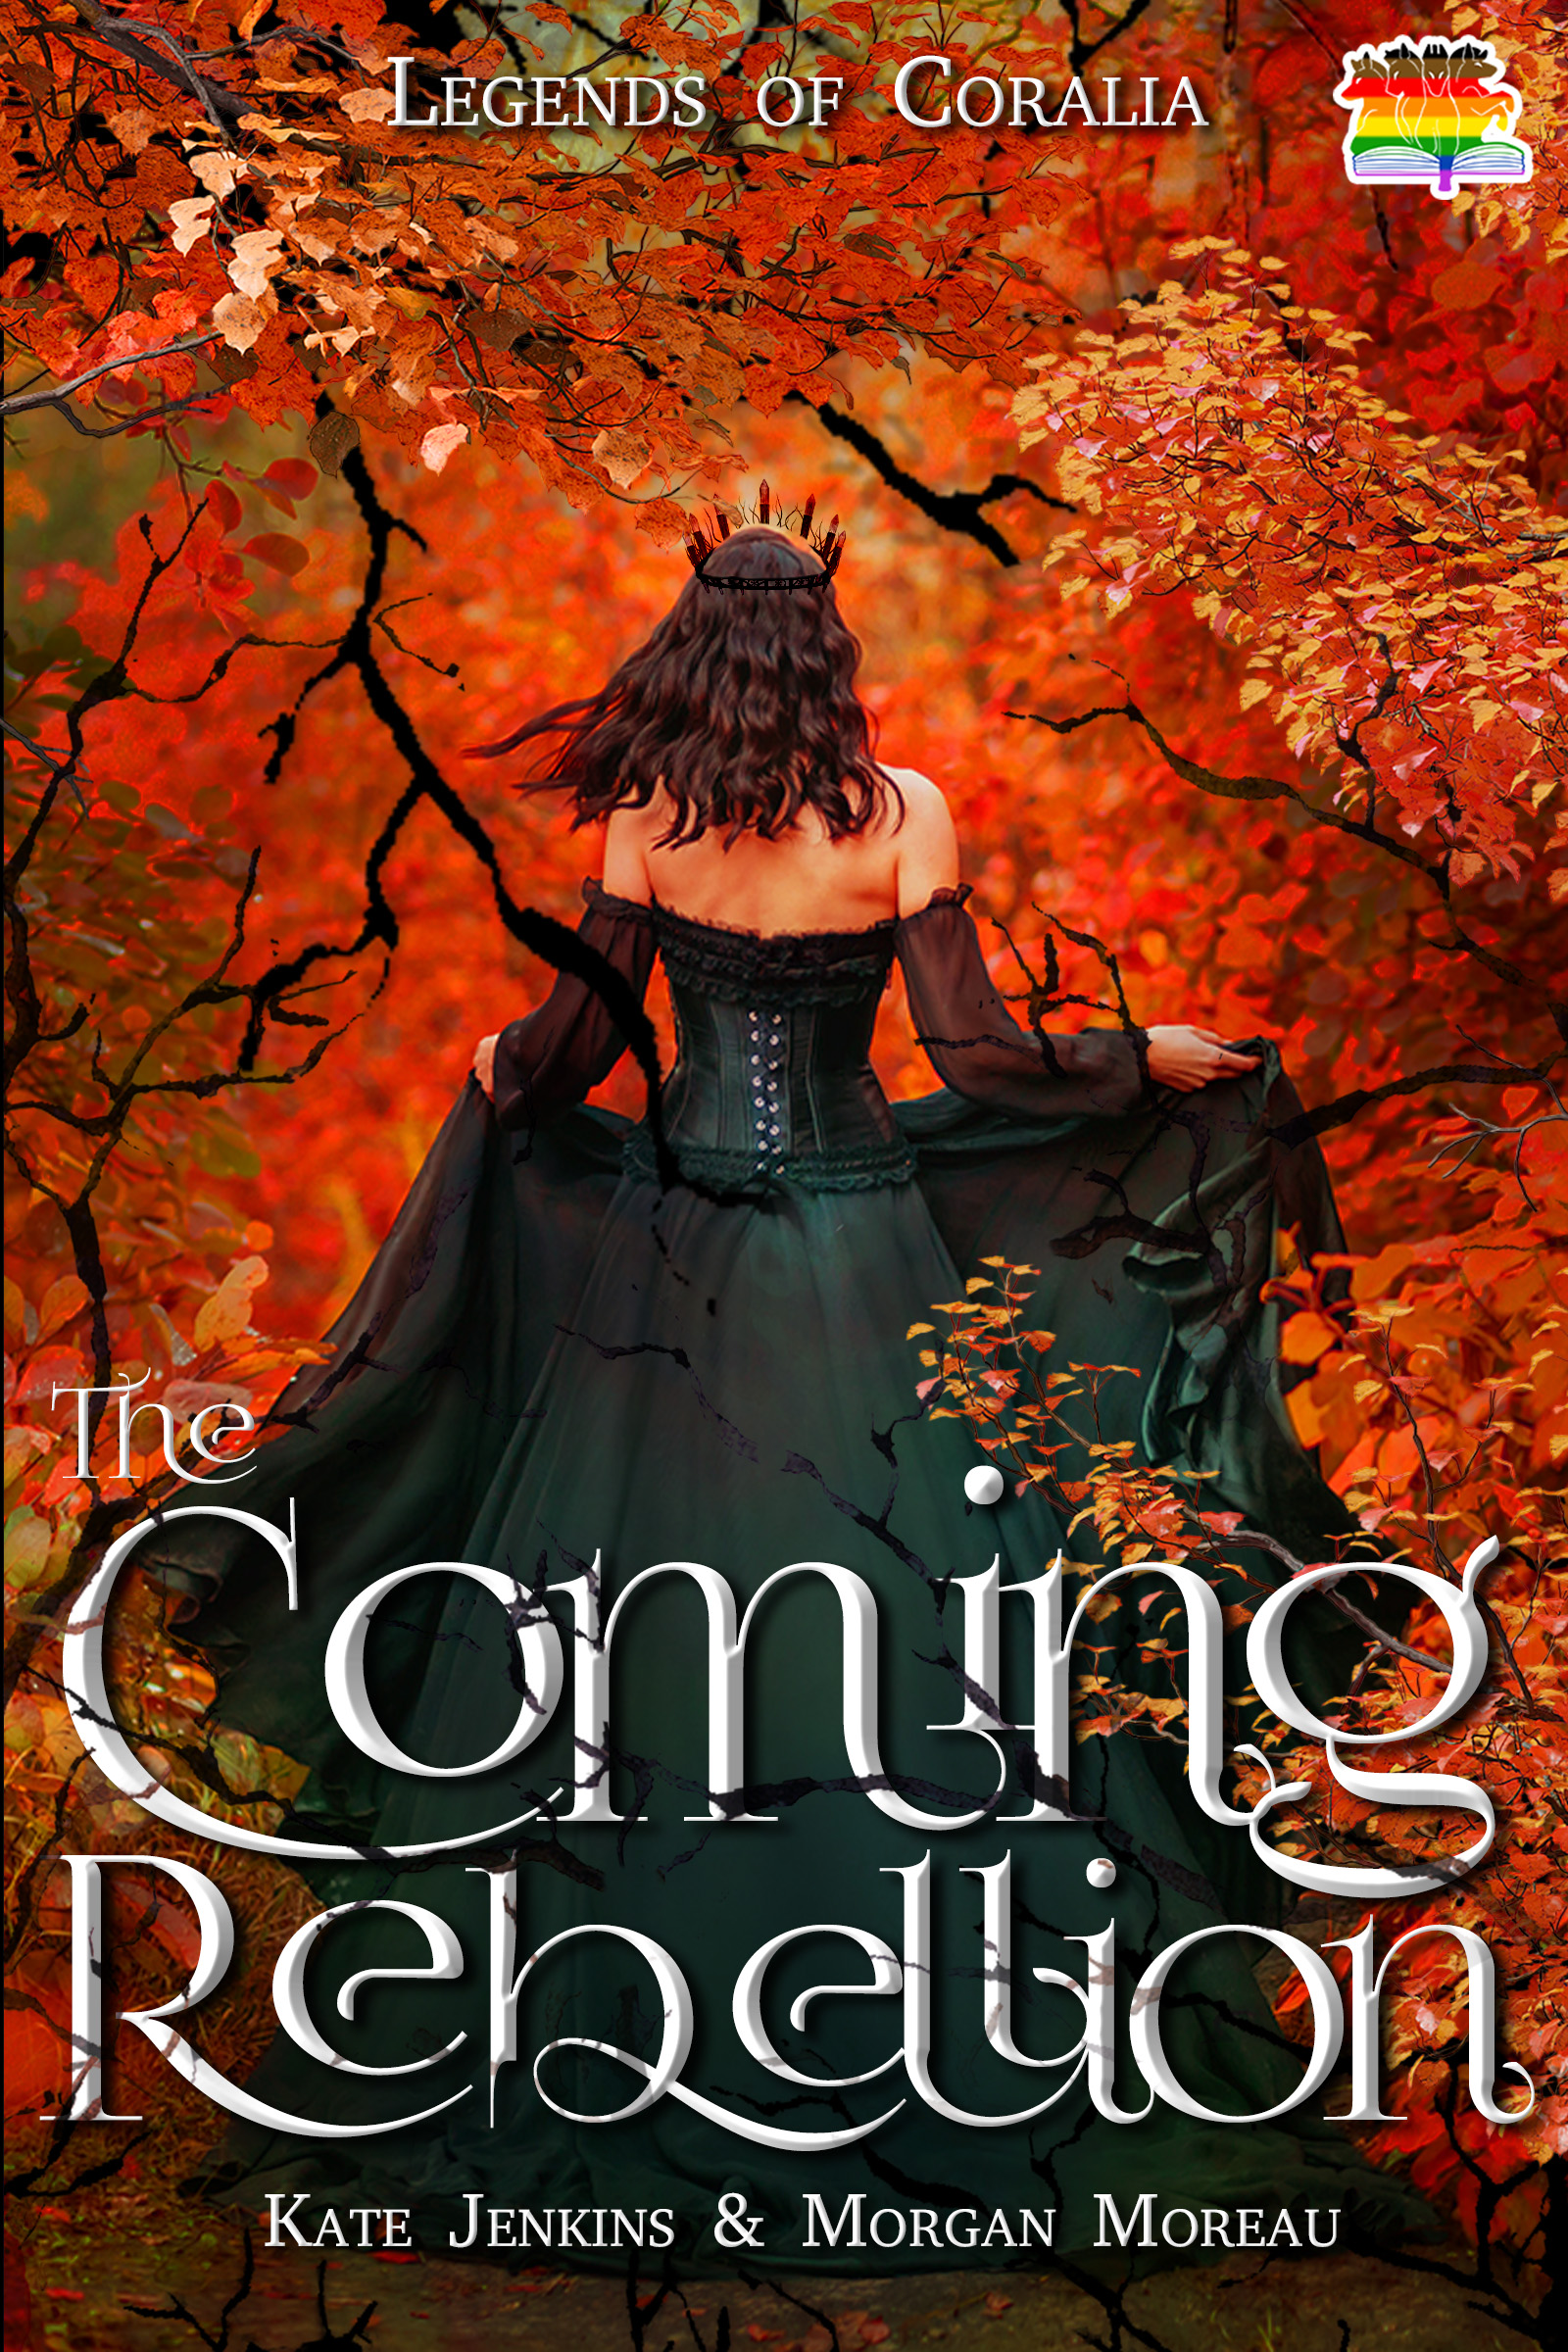 Pre-Order Now: The Coming Rebellion